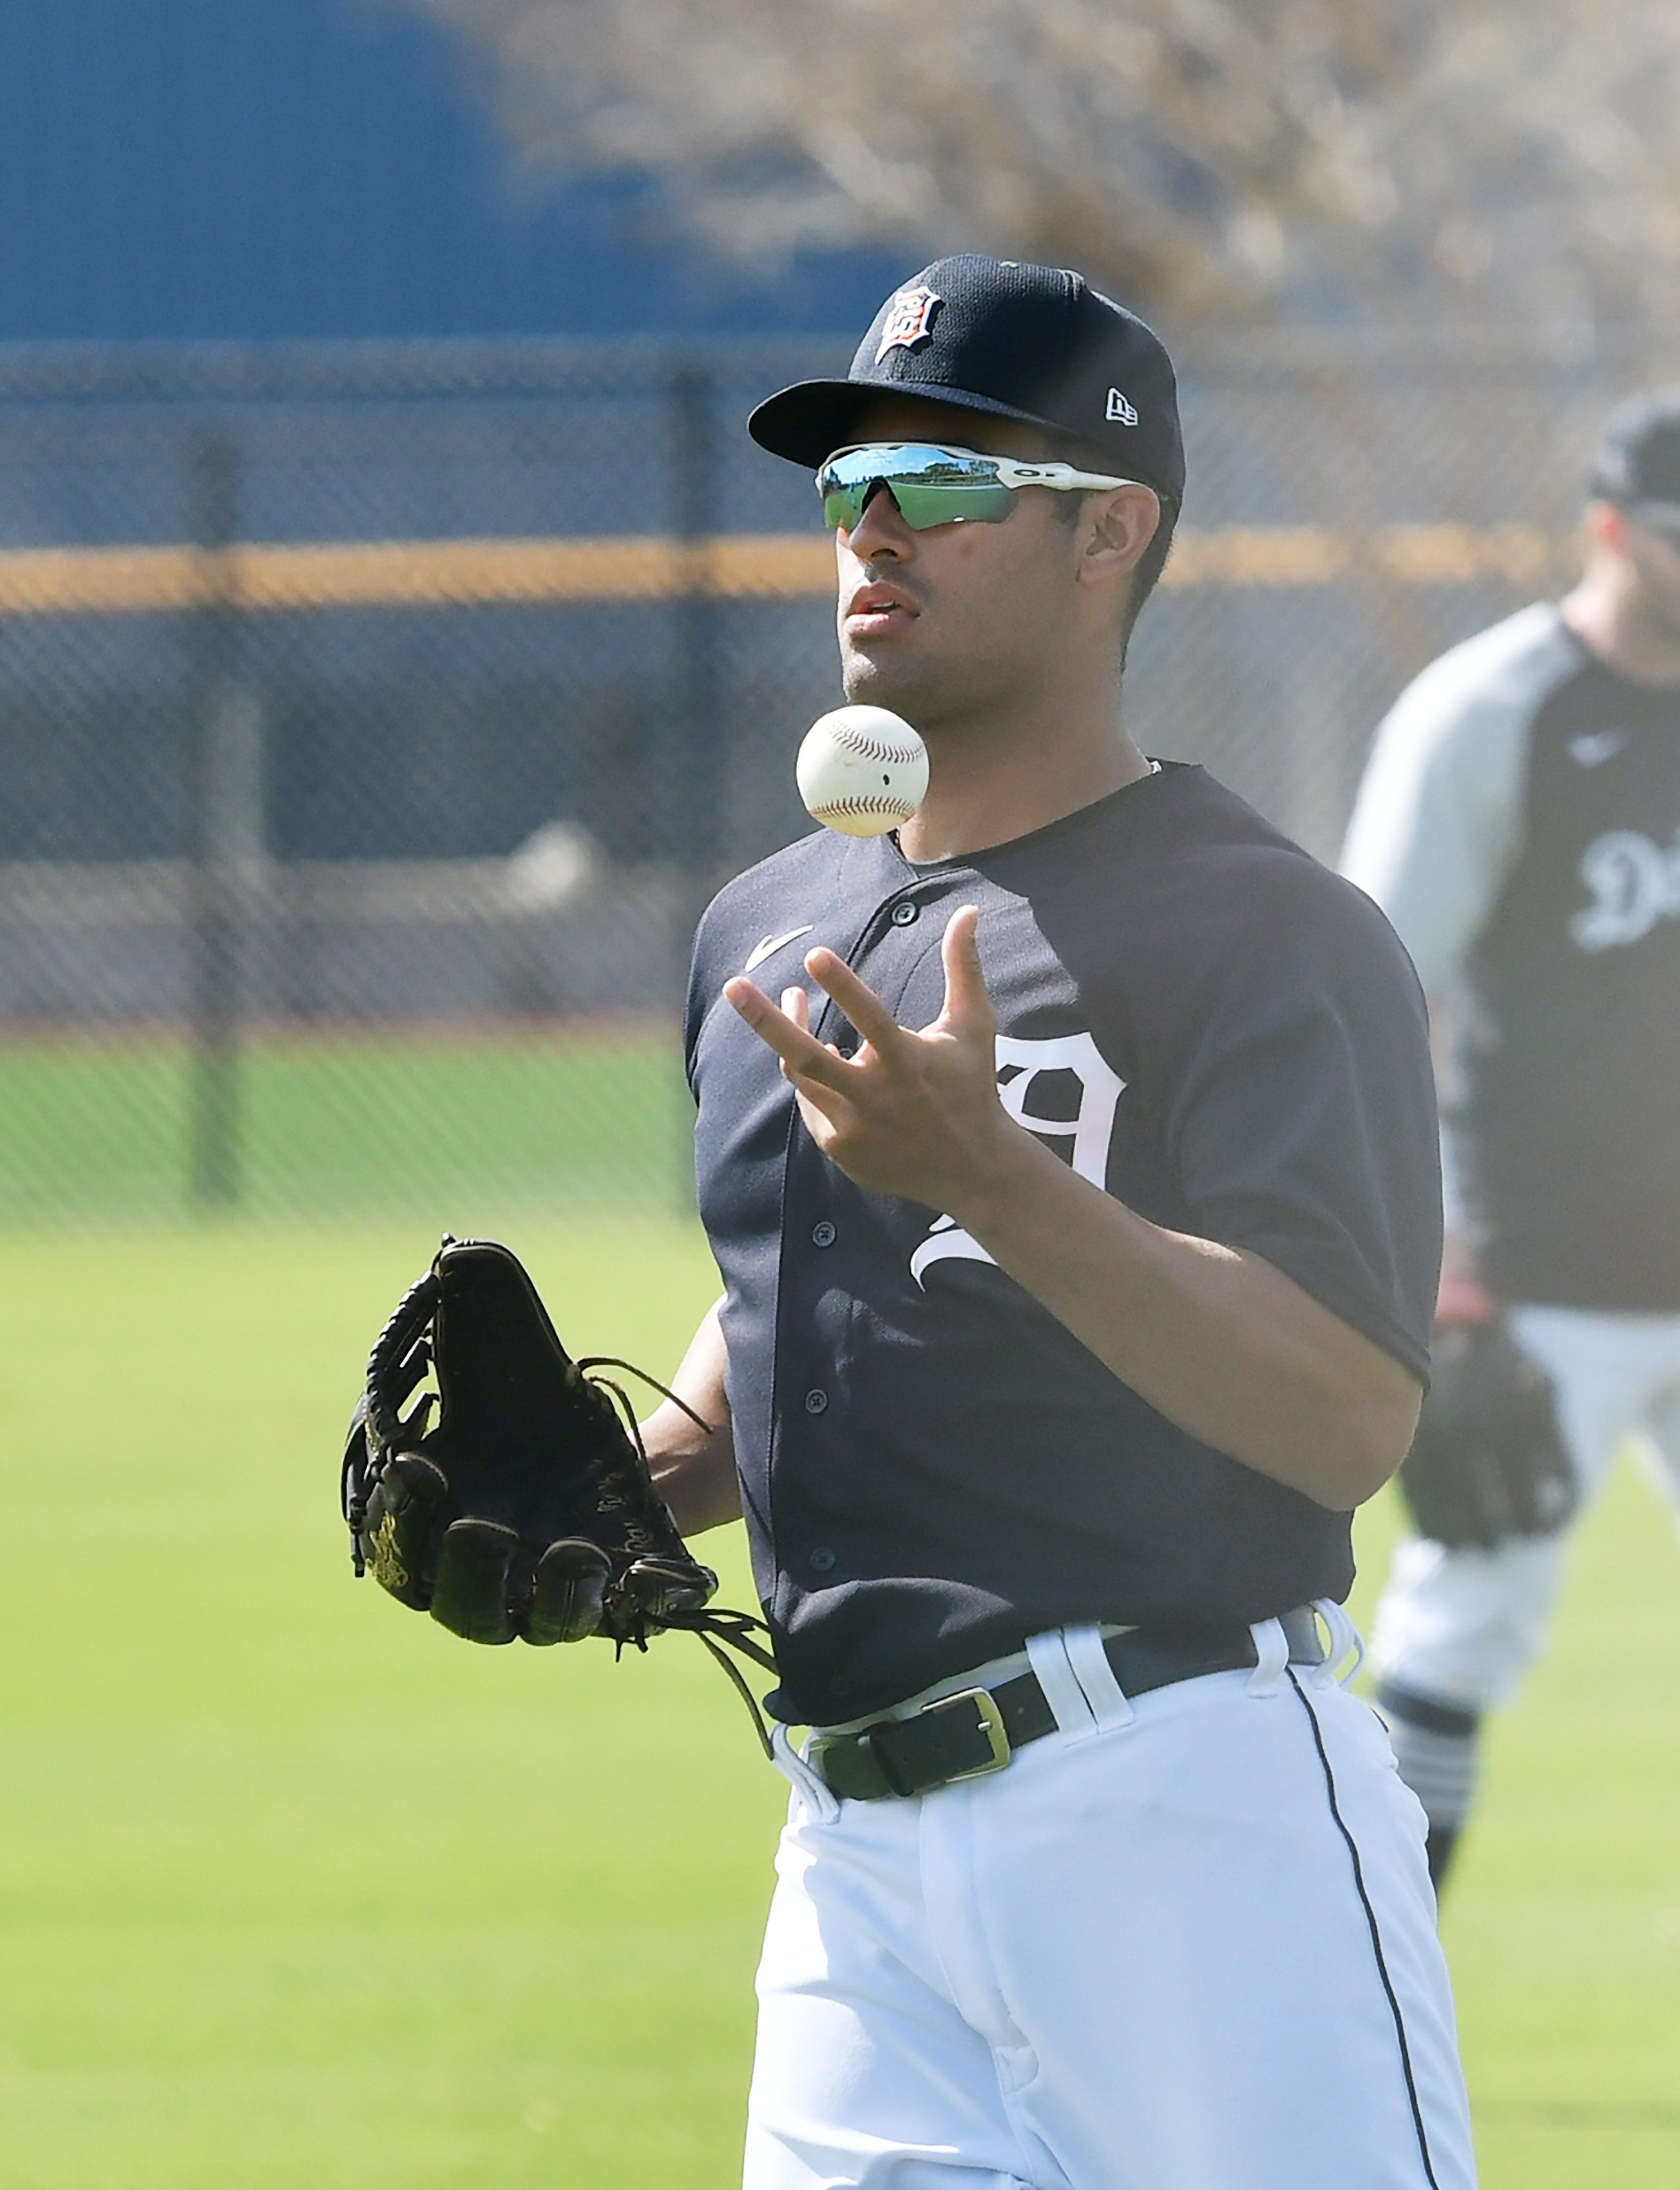 Tigers prospect Riley Greene prepares to throw the ball back in at the team's workout.